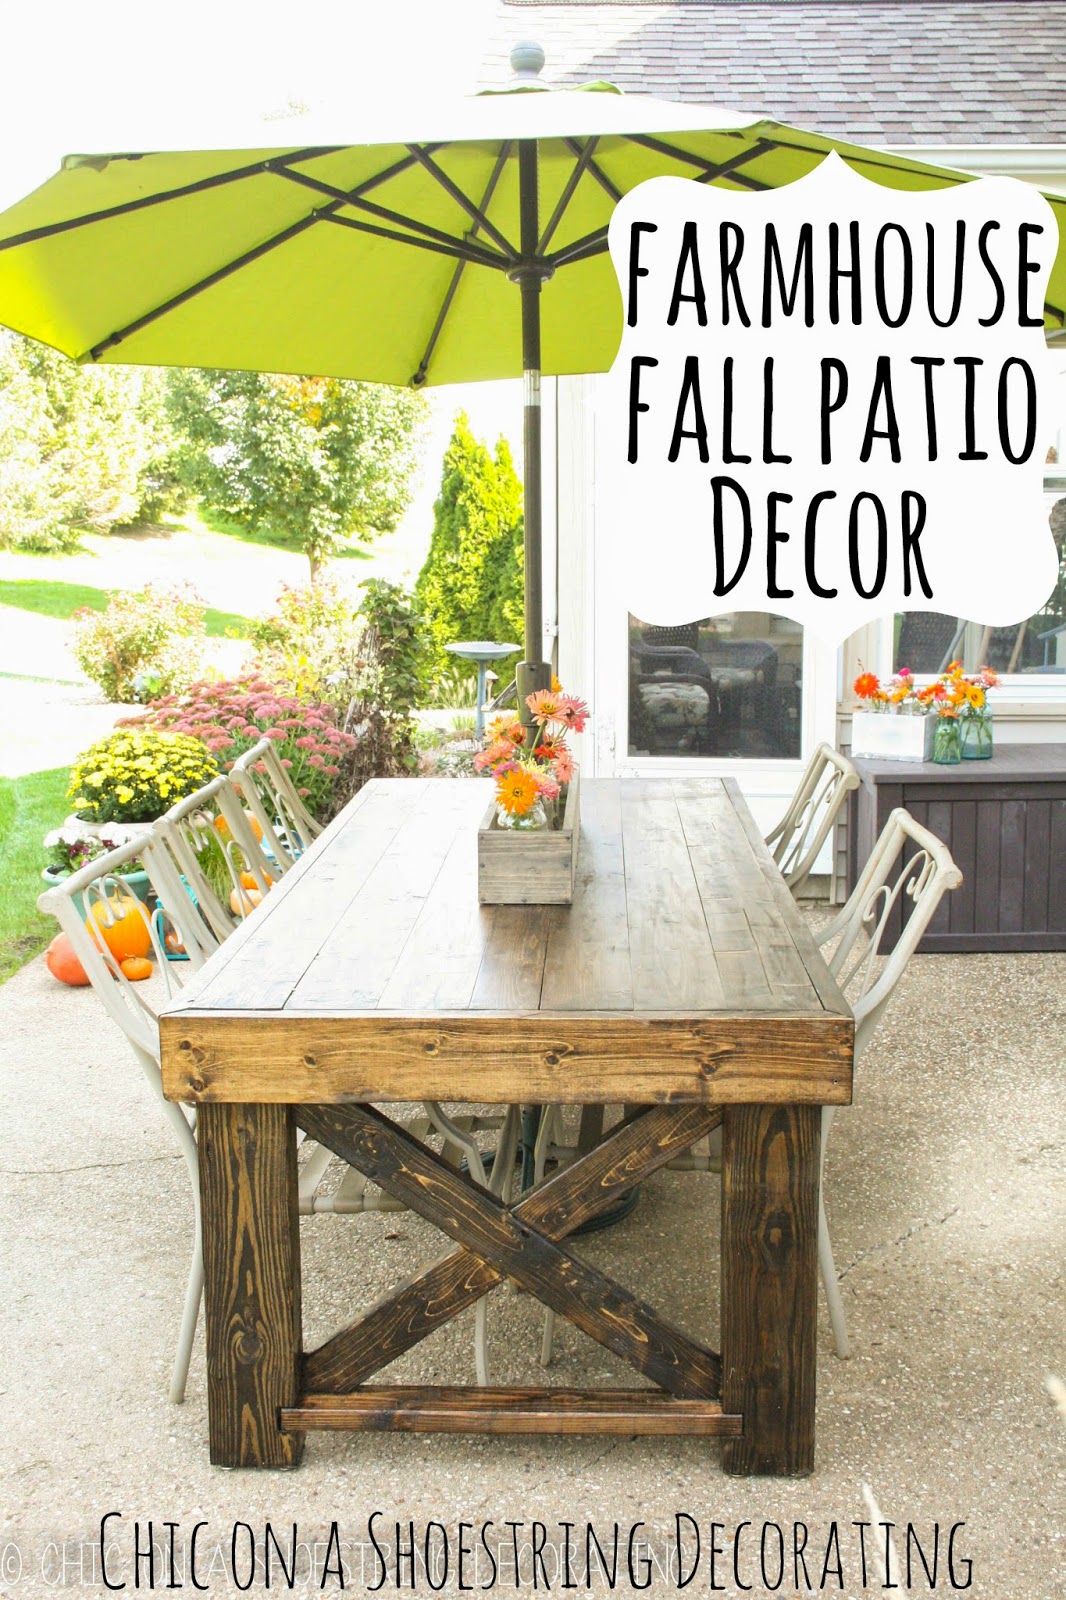 Farmhouse fall decor chic on a shoestring decorating blog